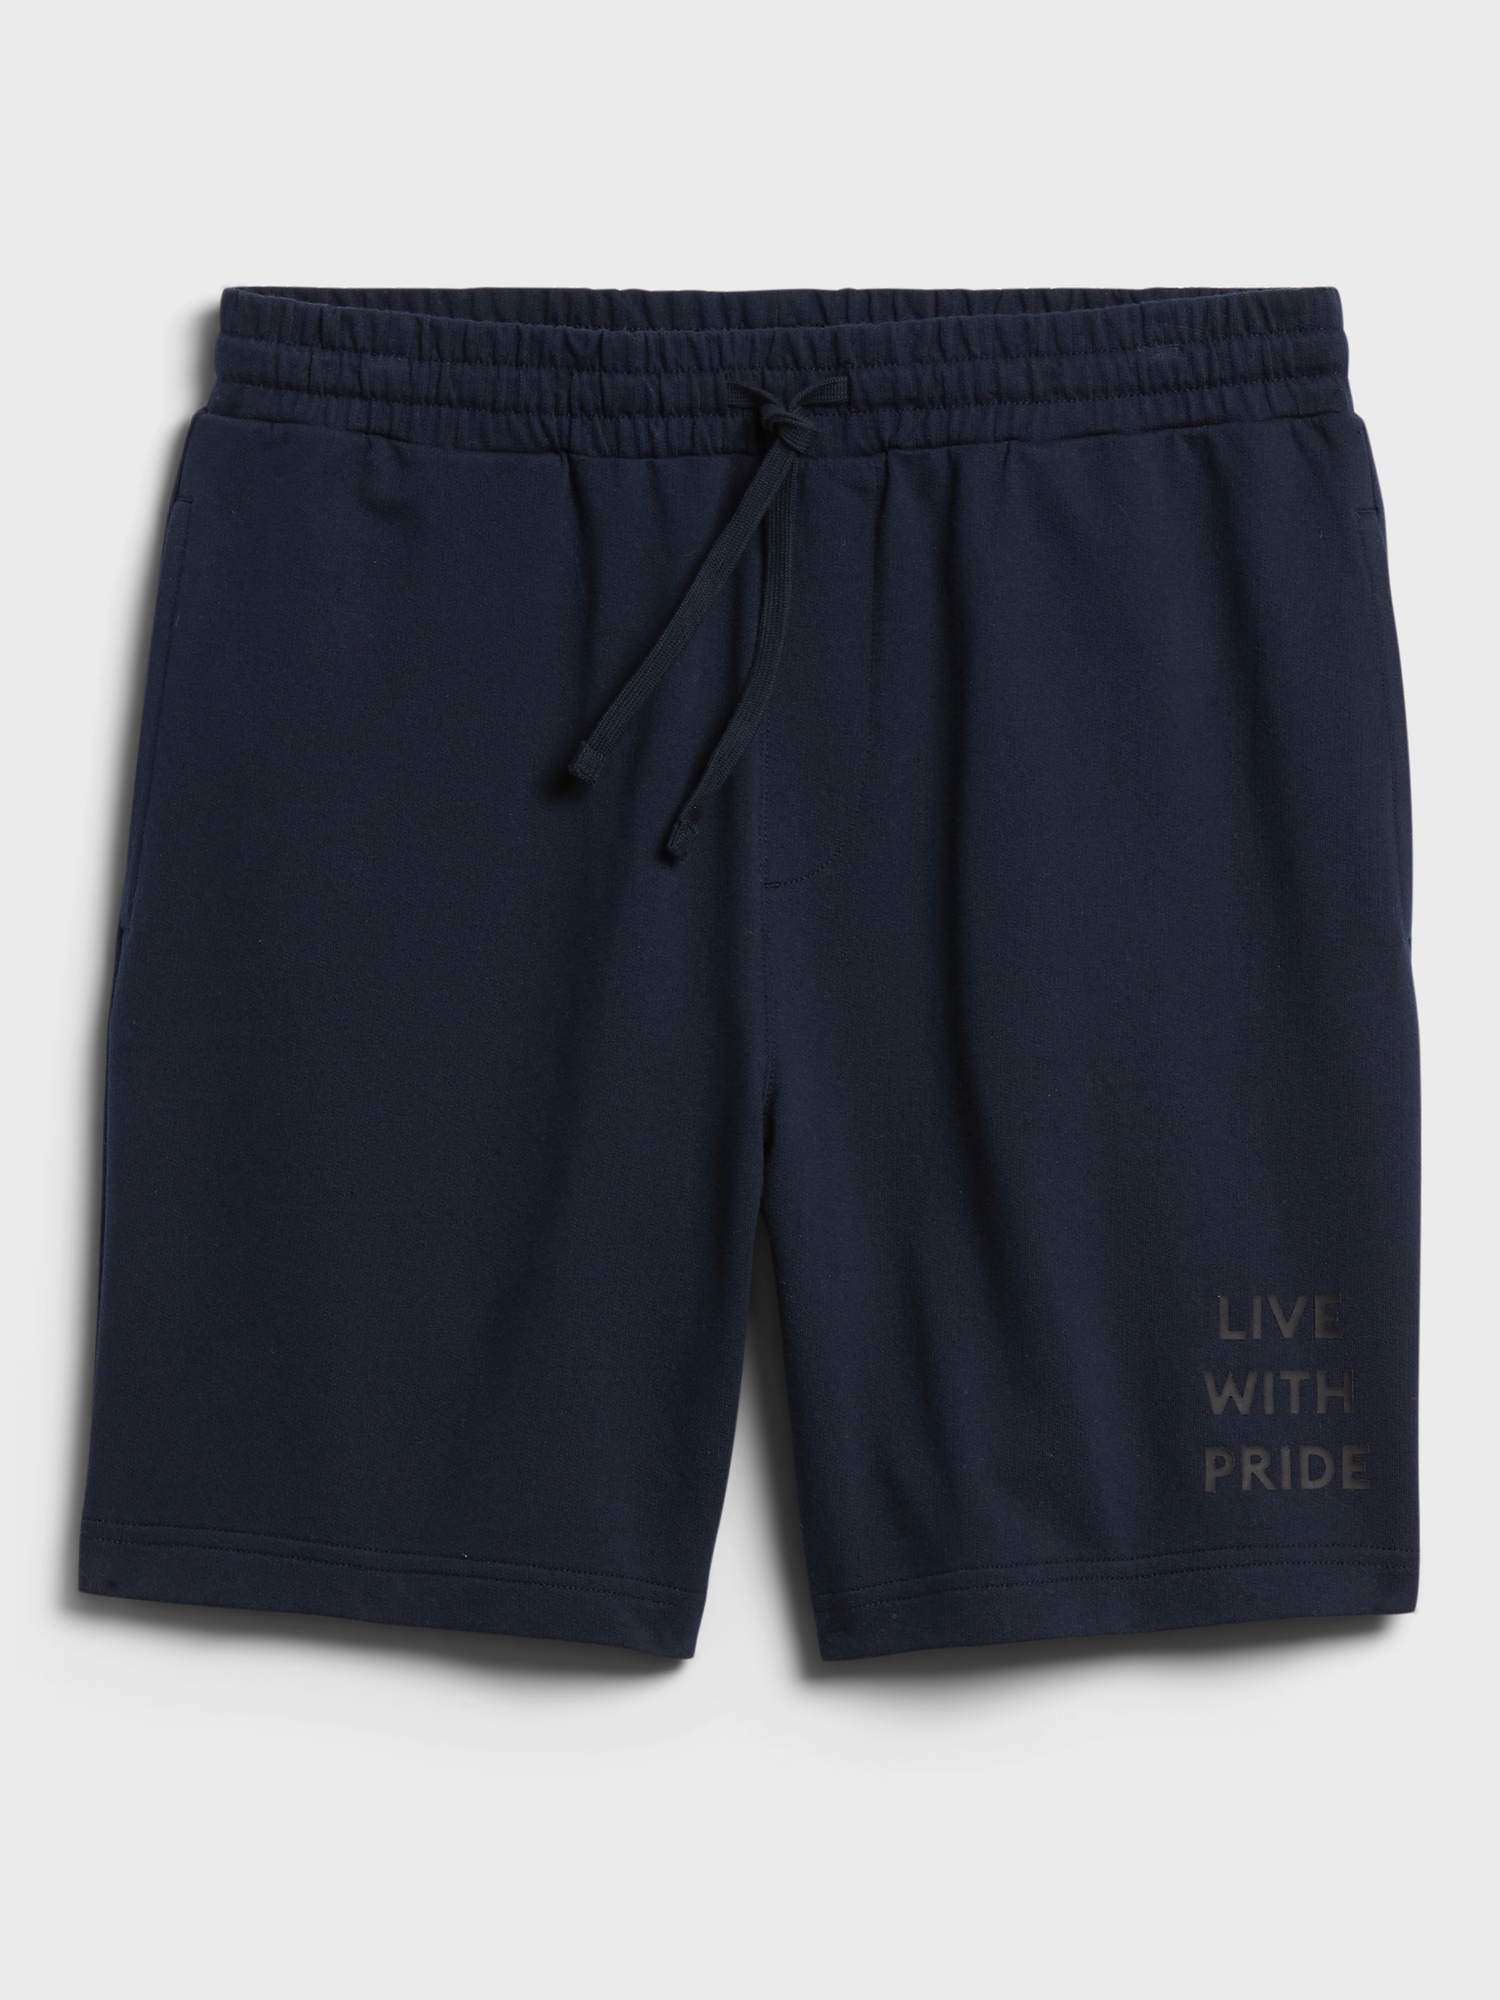 Pride French Terry Short (Men's Sizes)